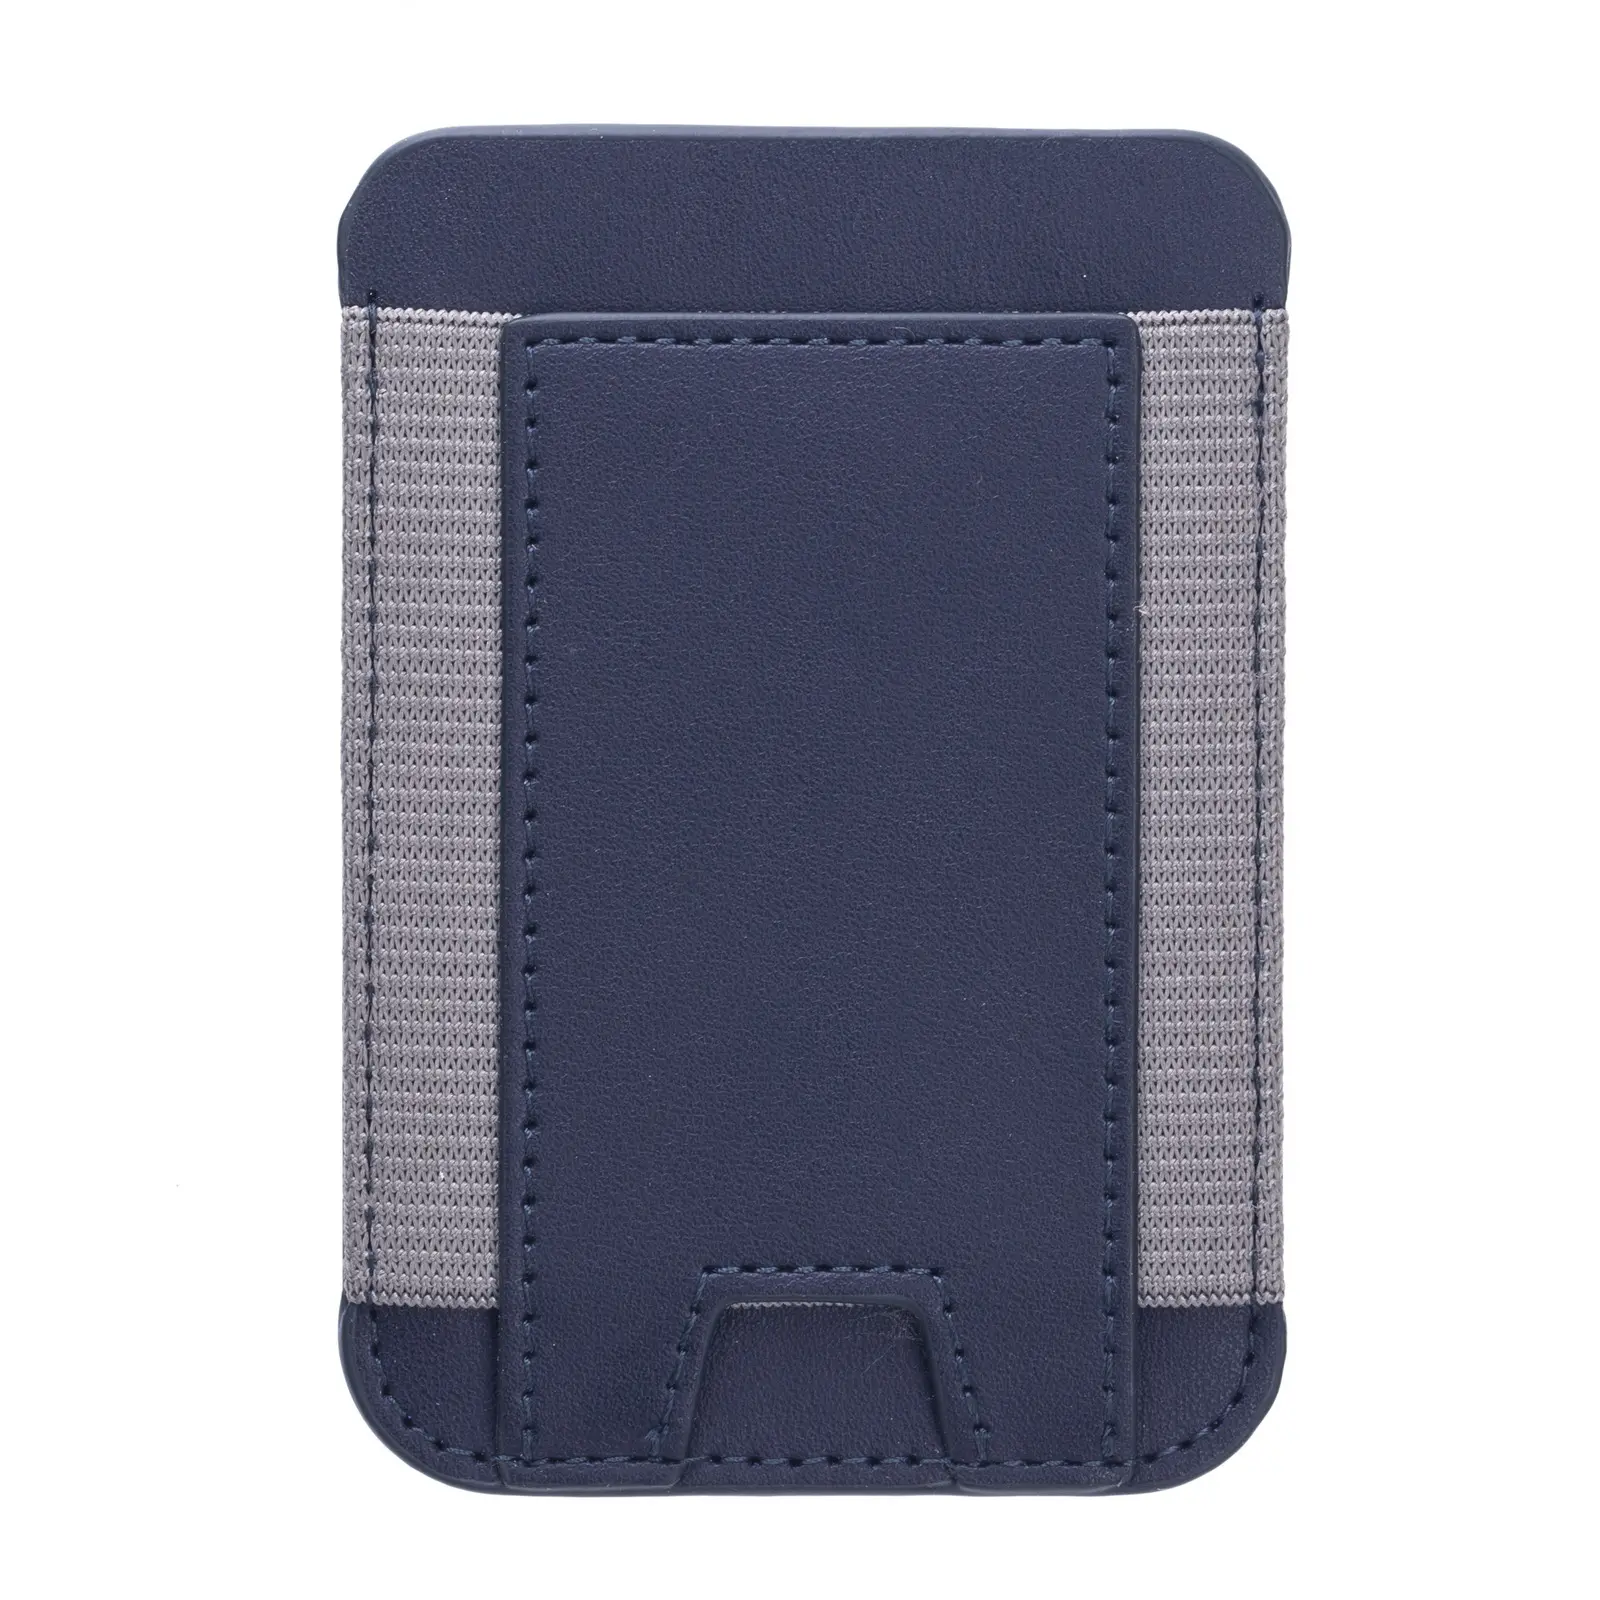 iphone 5 card wallet